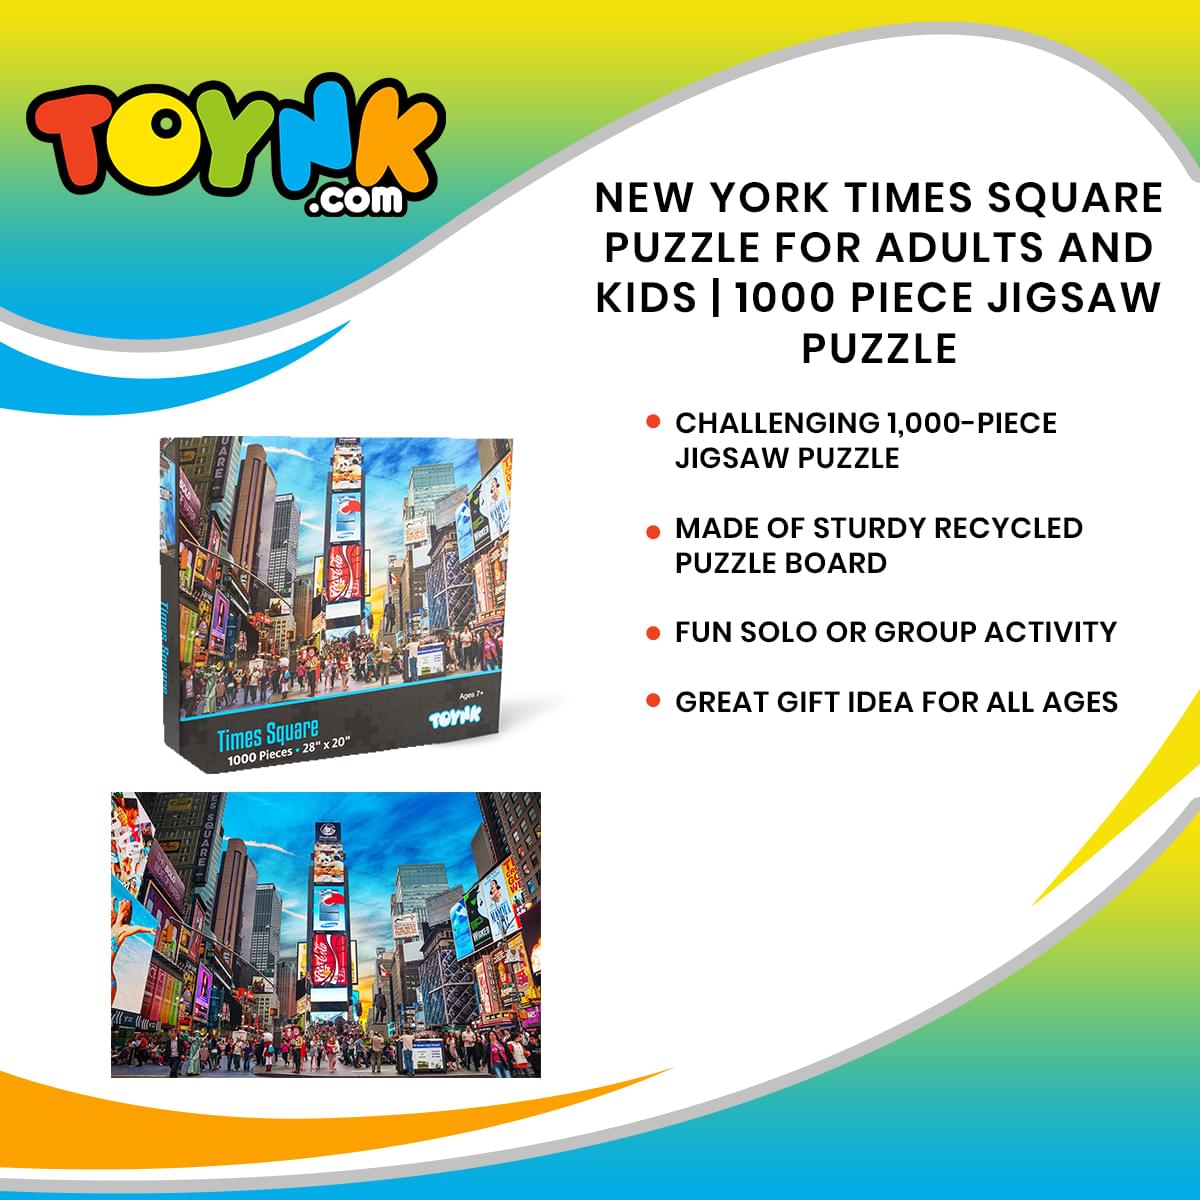 New York Times Square Puzzle | 1000 Piece Jigsaw Puzzle